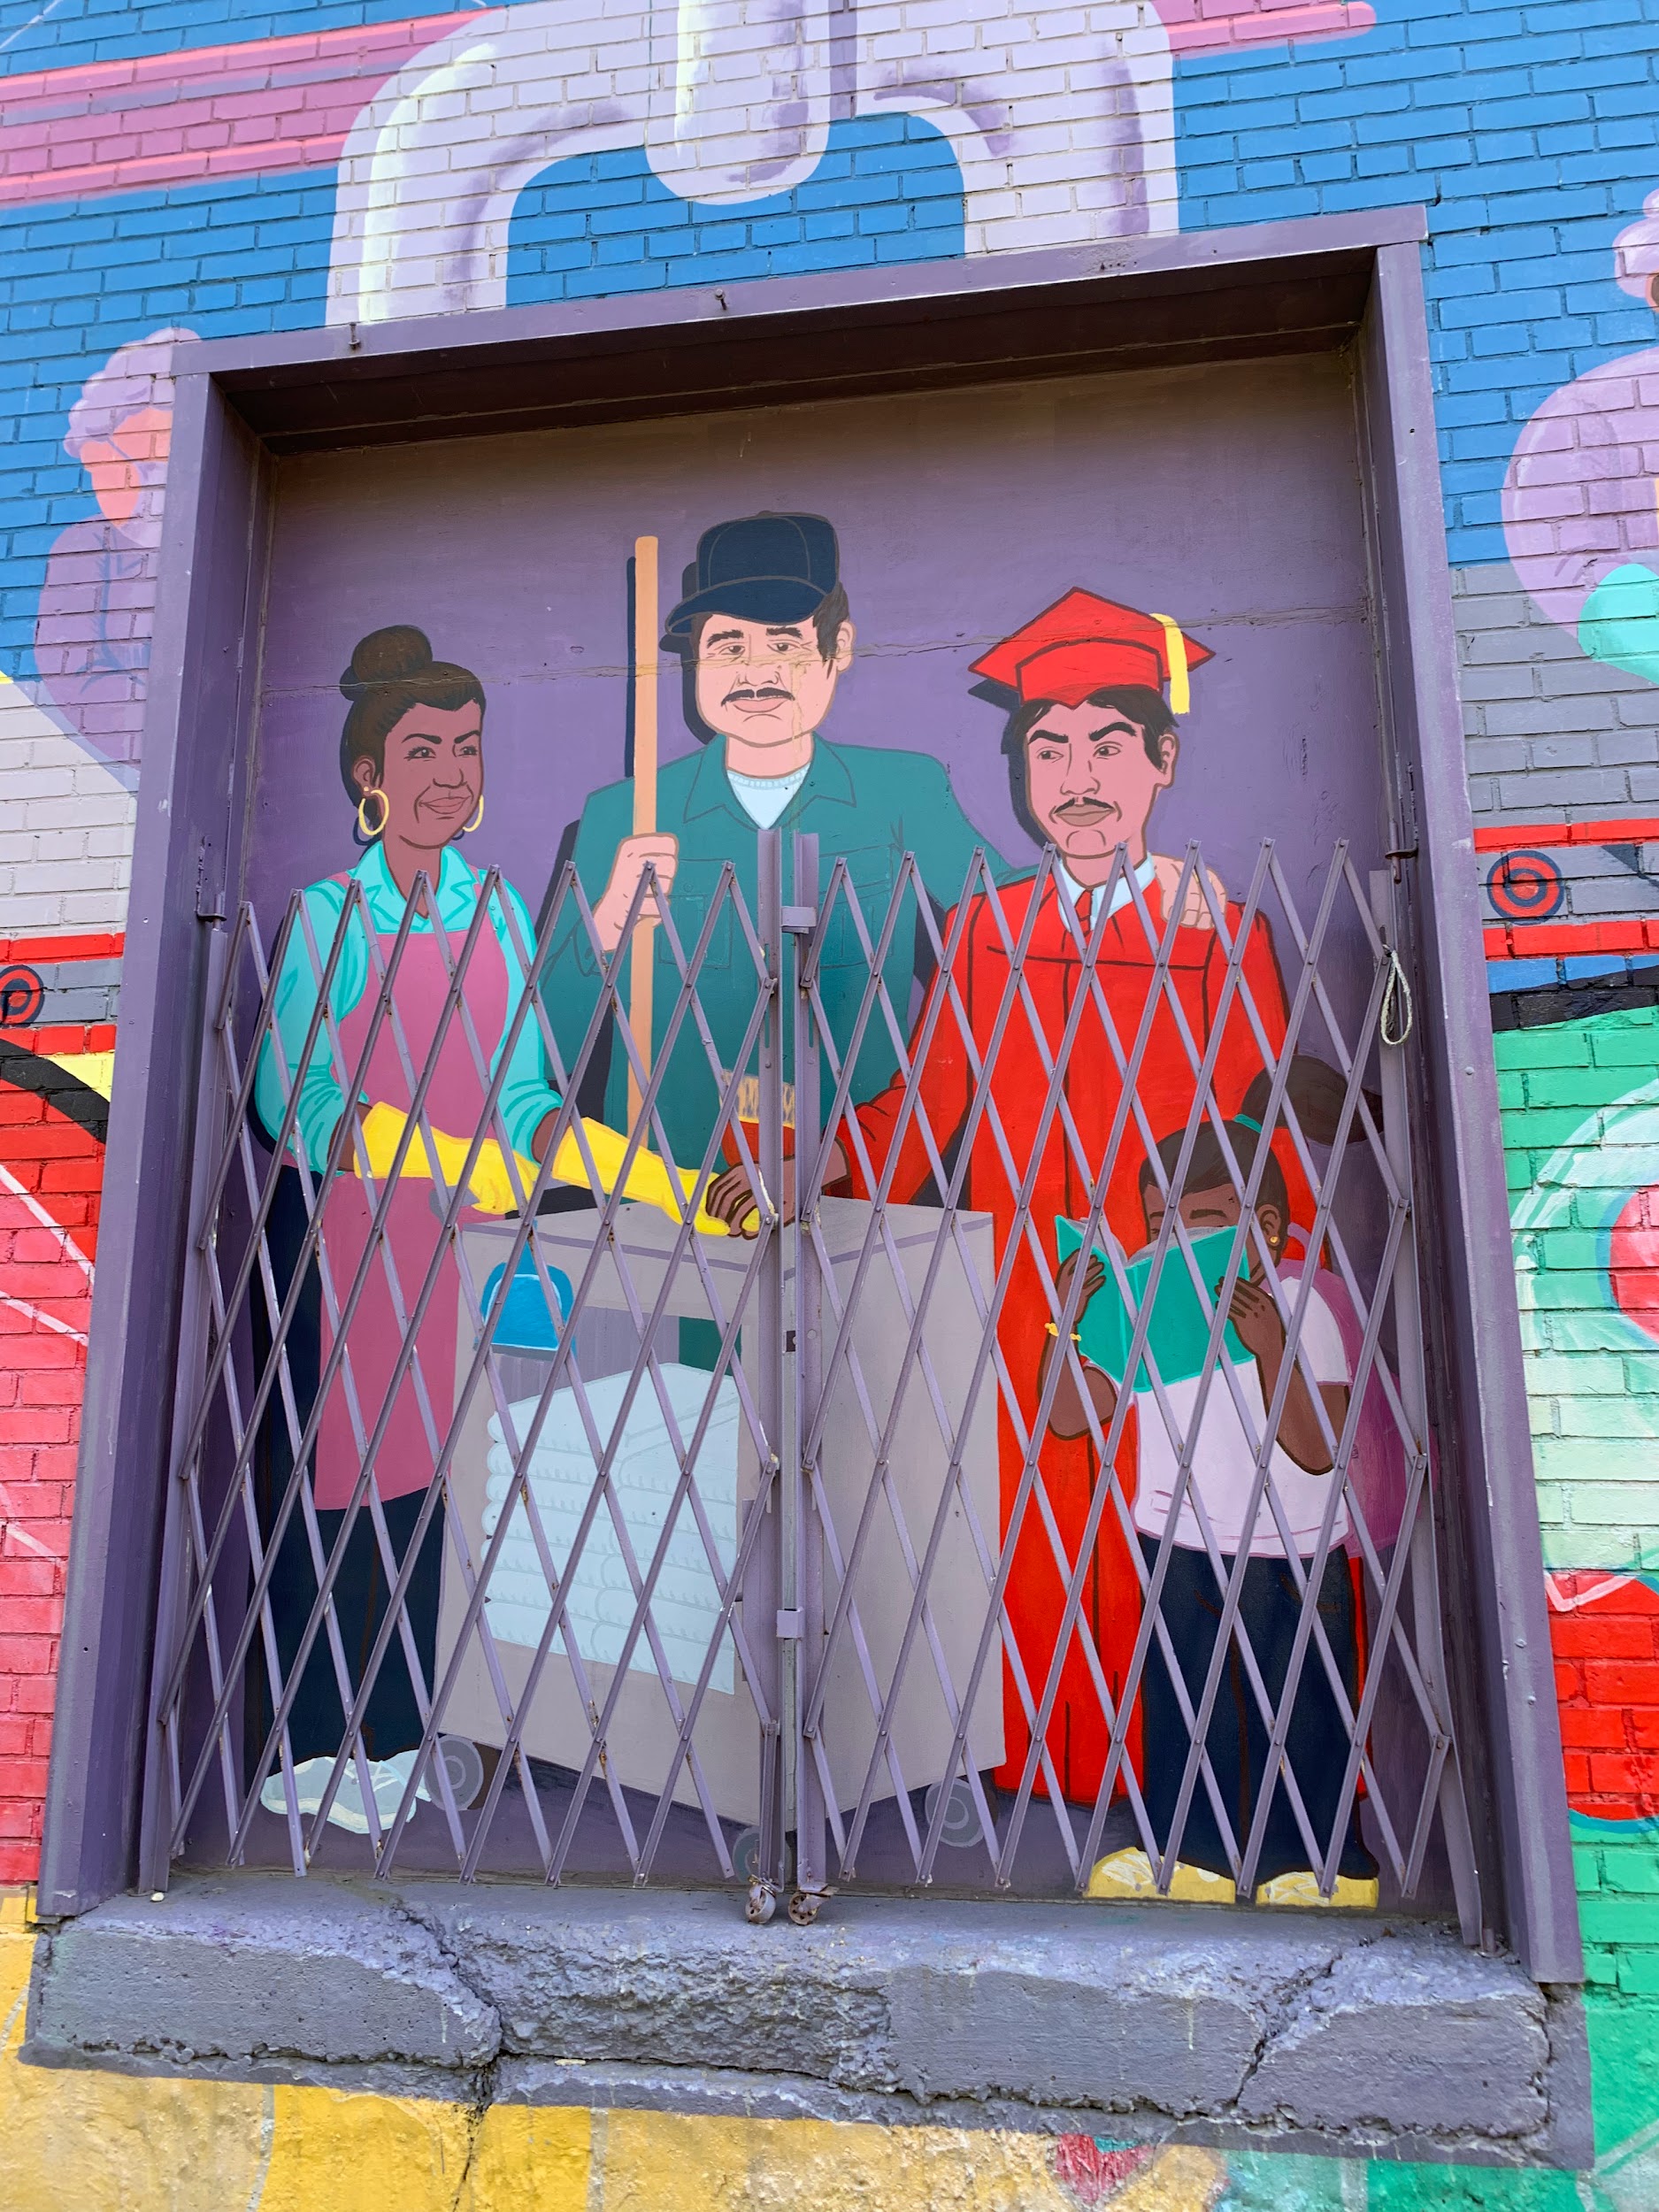 A zoomed in image of the family painted on the mural “El Abrazo.” The mother of the family holds cleaning supplies and is wearing a robe. The father is holding a broom. Their son is wearing a graduation cap and gown. Their daughter is reading a book.